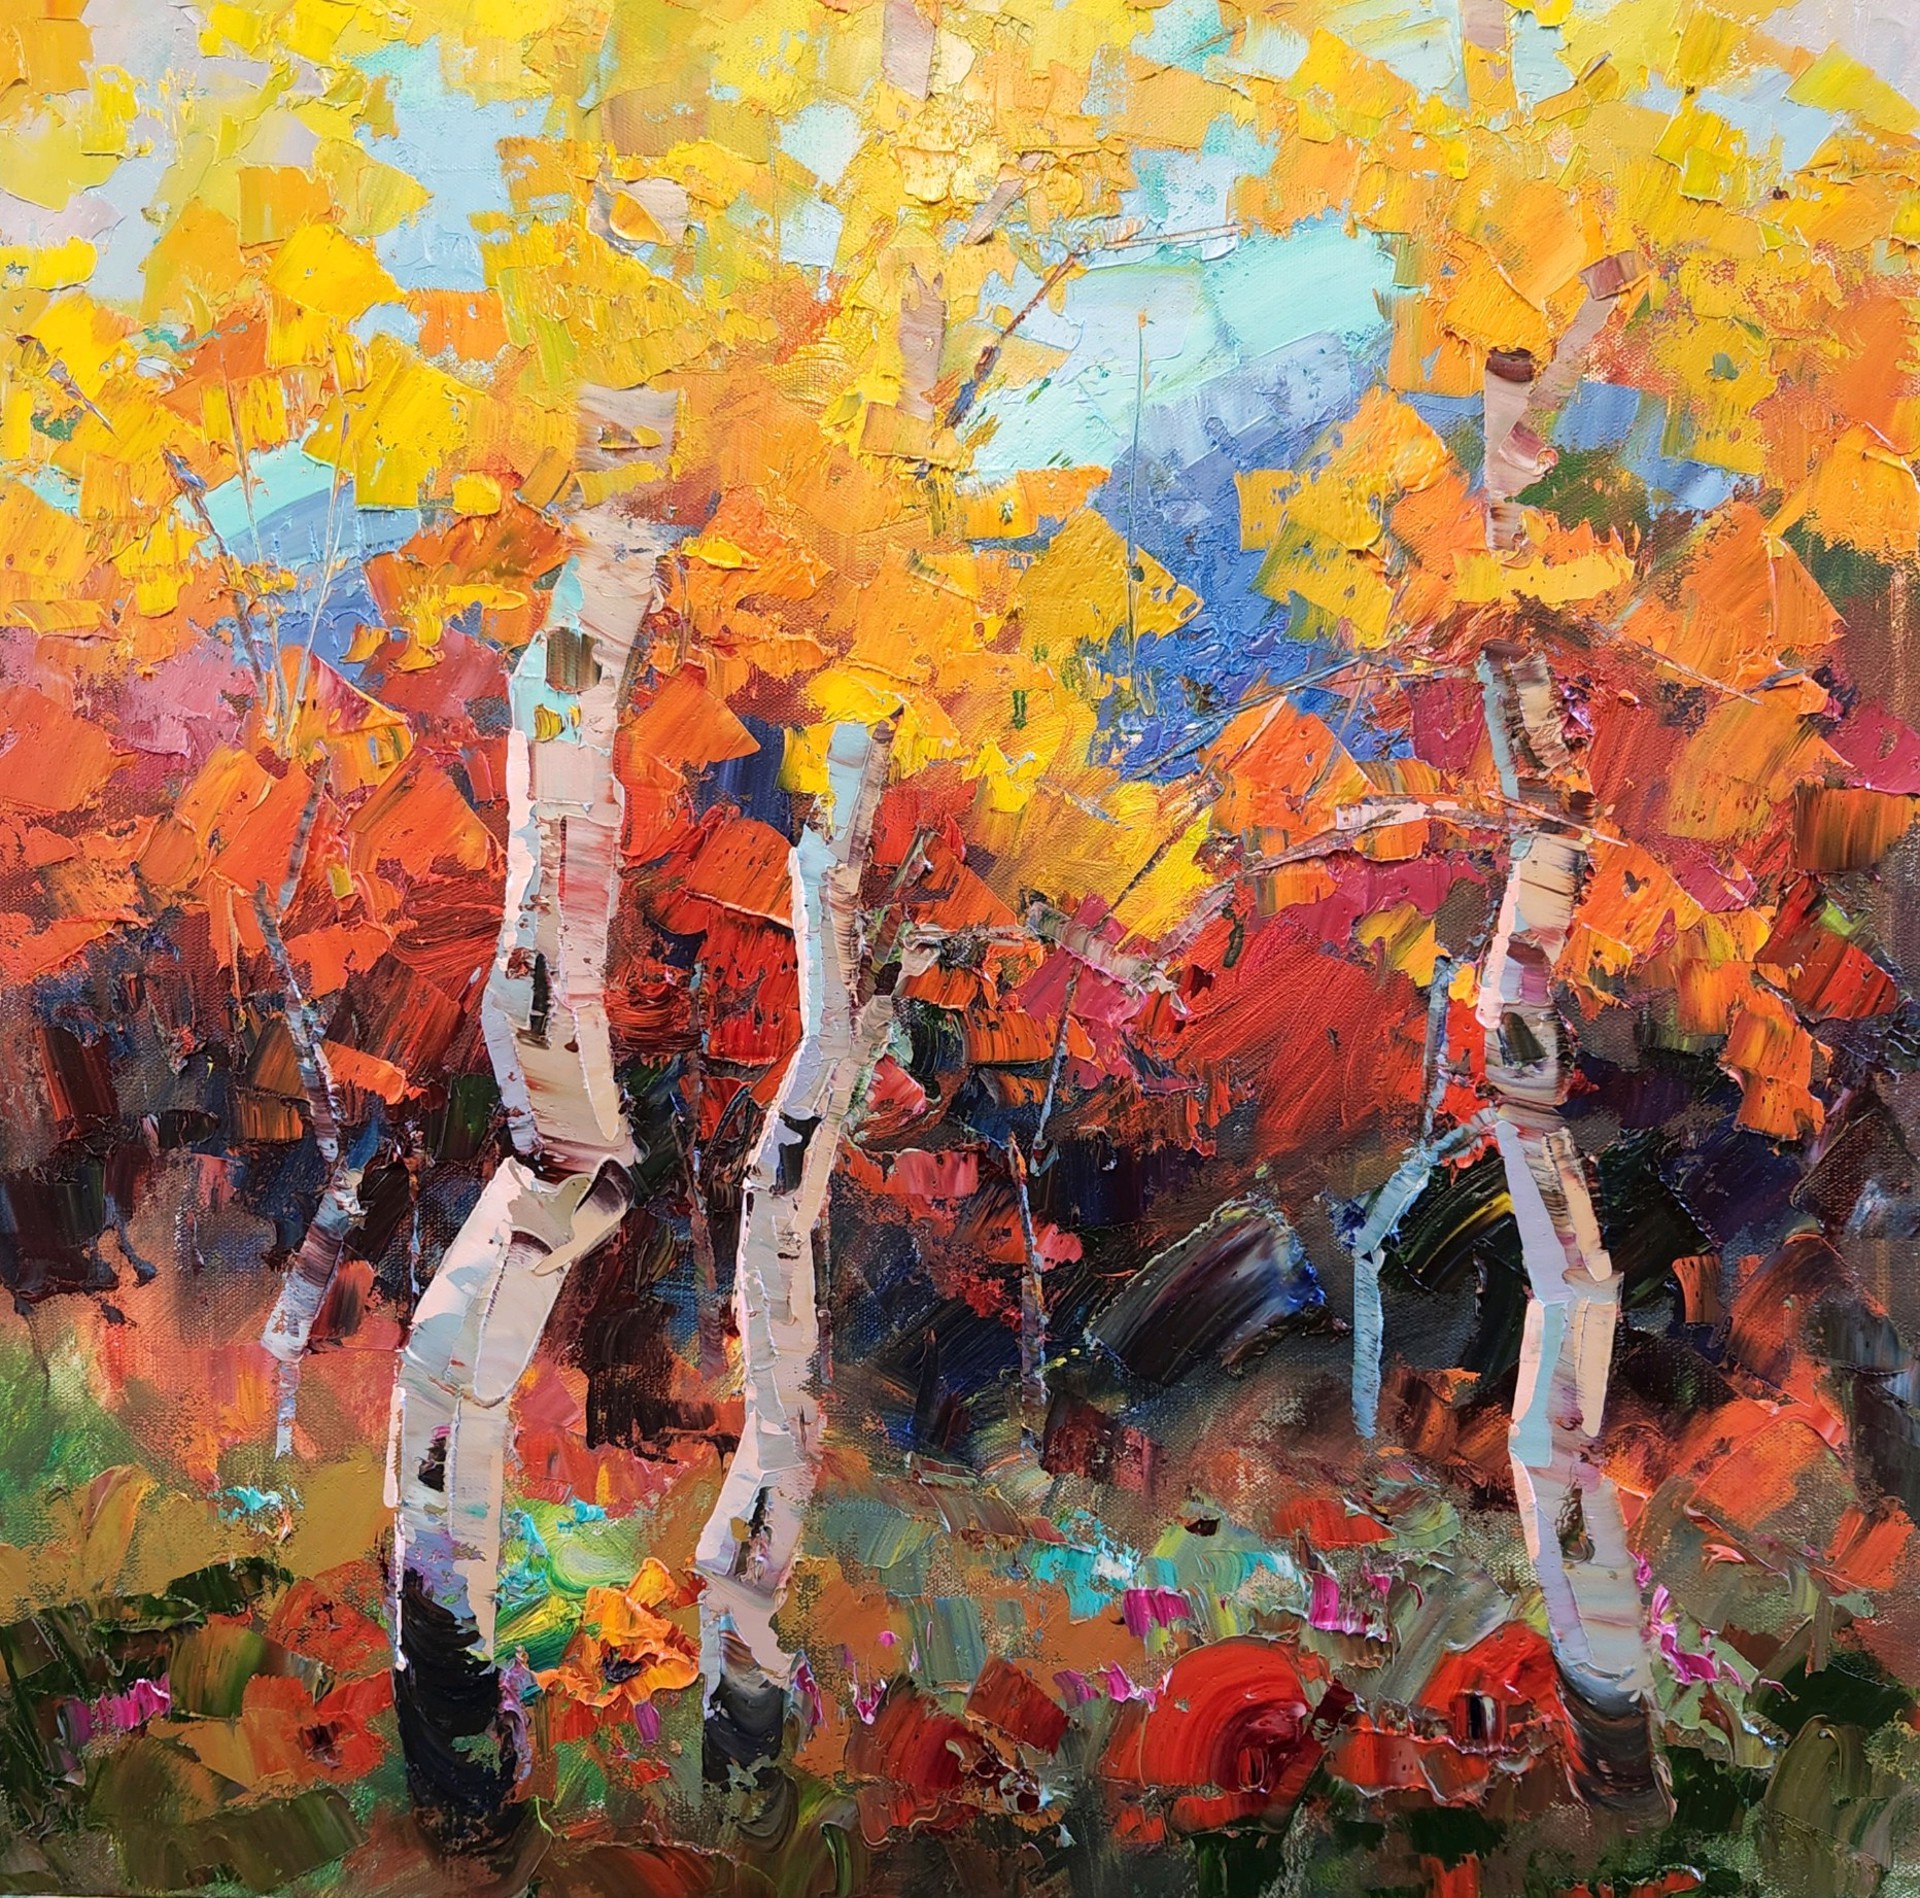 A MEMORY OF AUTUMN LIGHT by Troy Collins